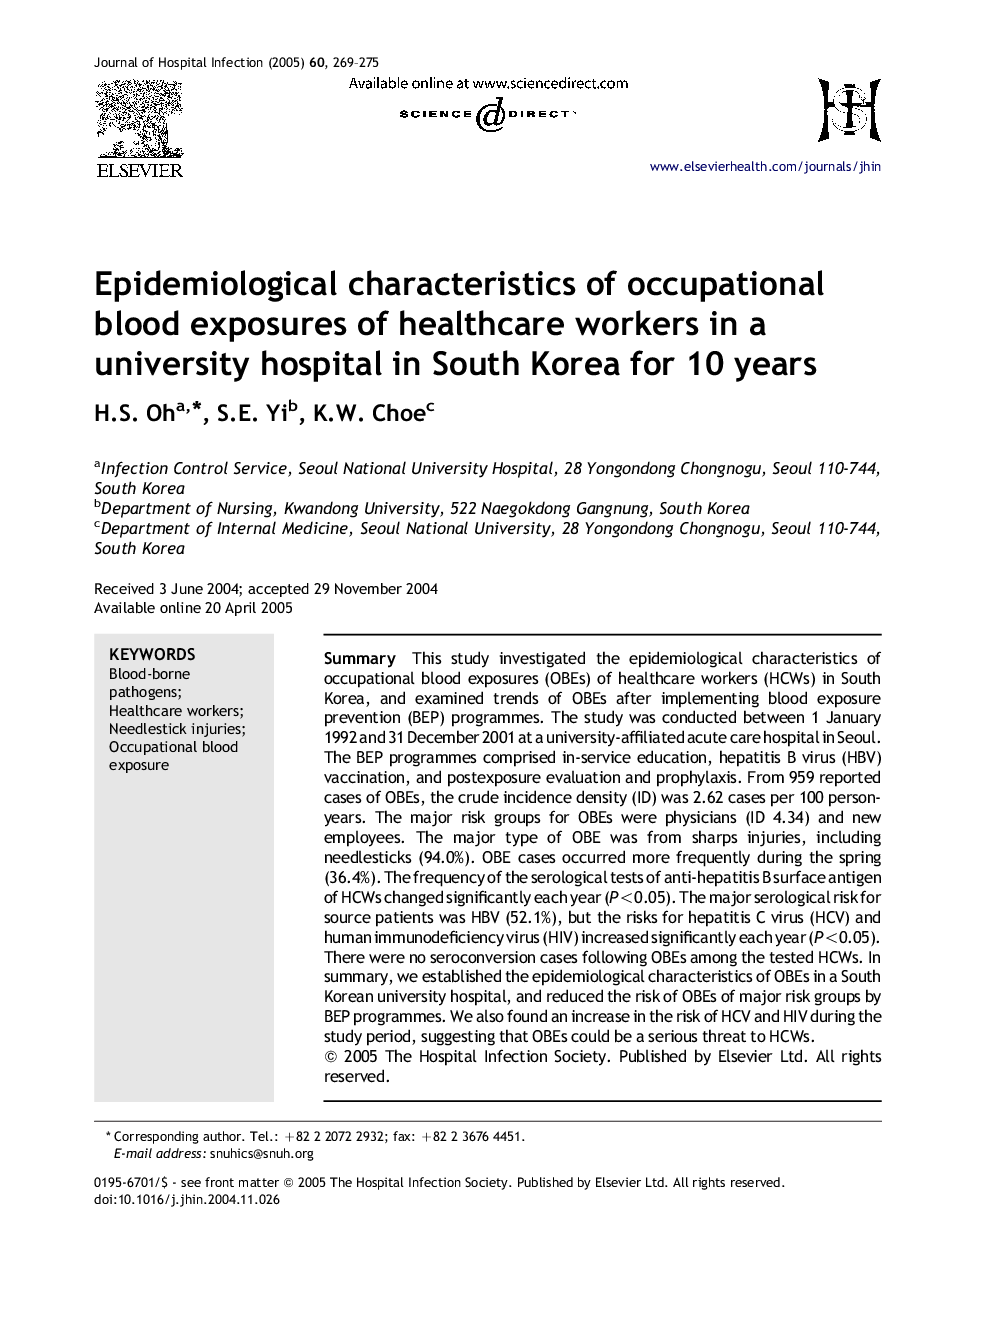 Epidemiological characteristics of occupational blood exposures of healthcare workers in a university hospital in South Korea for 10 years